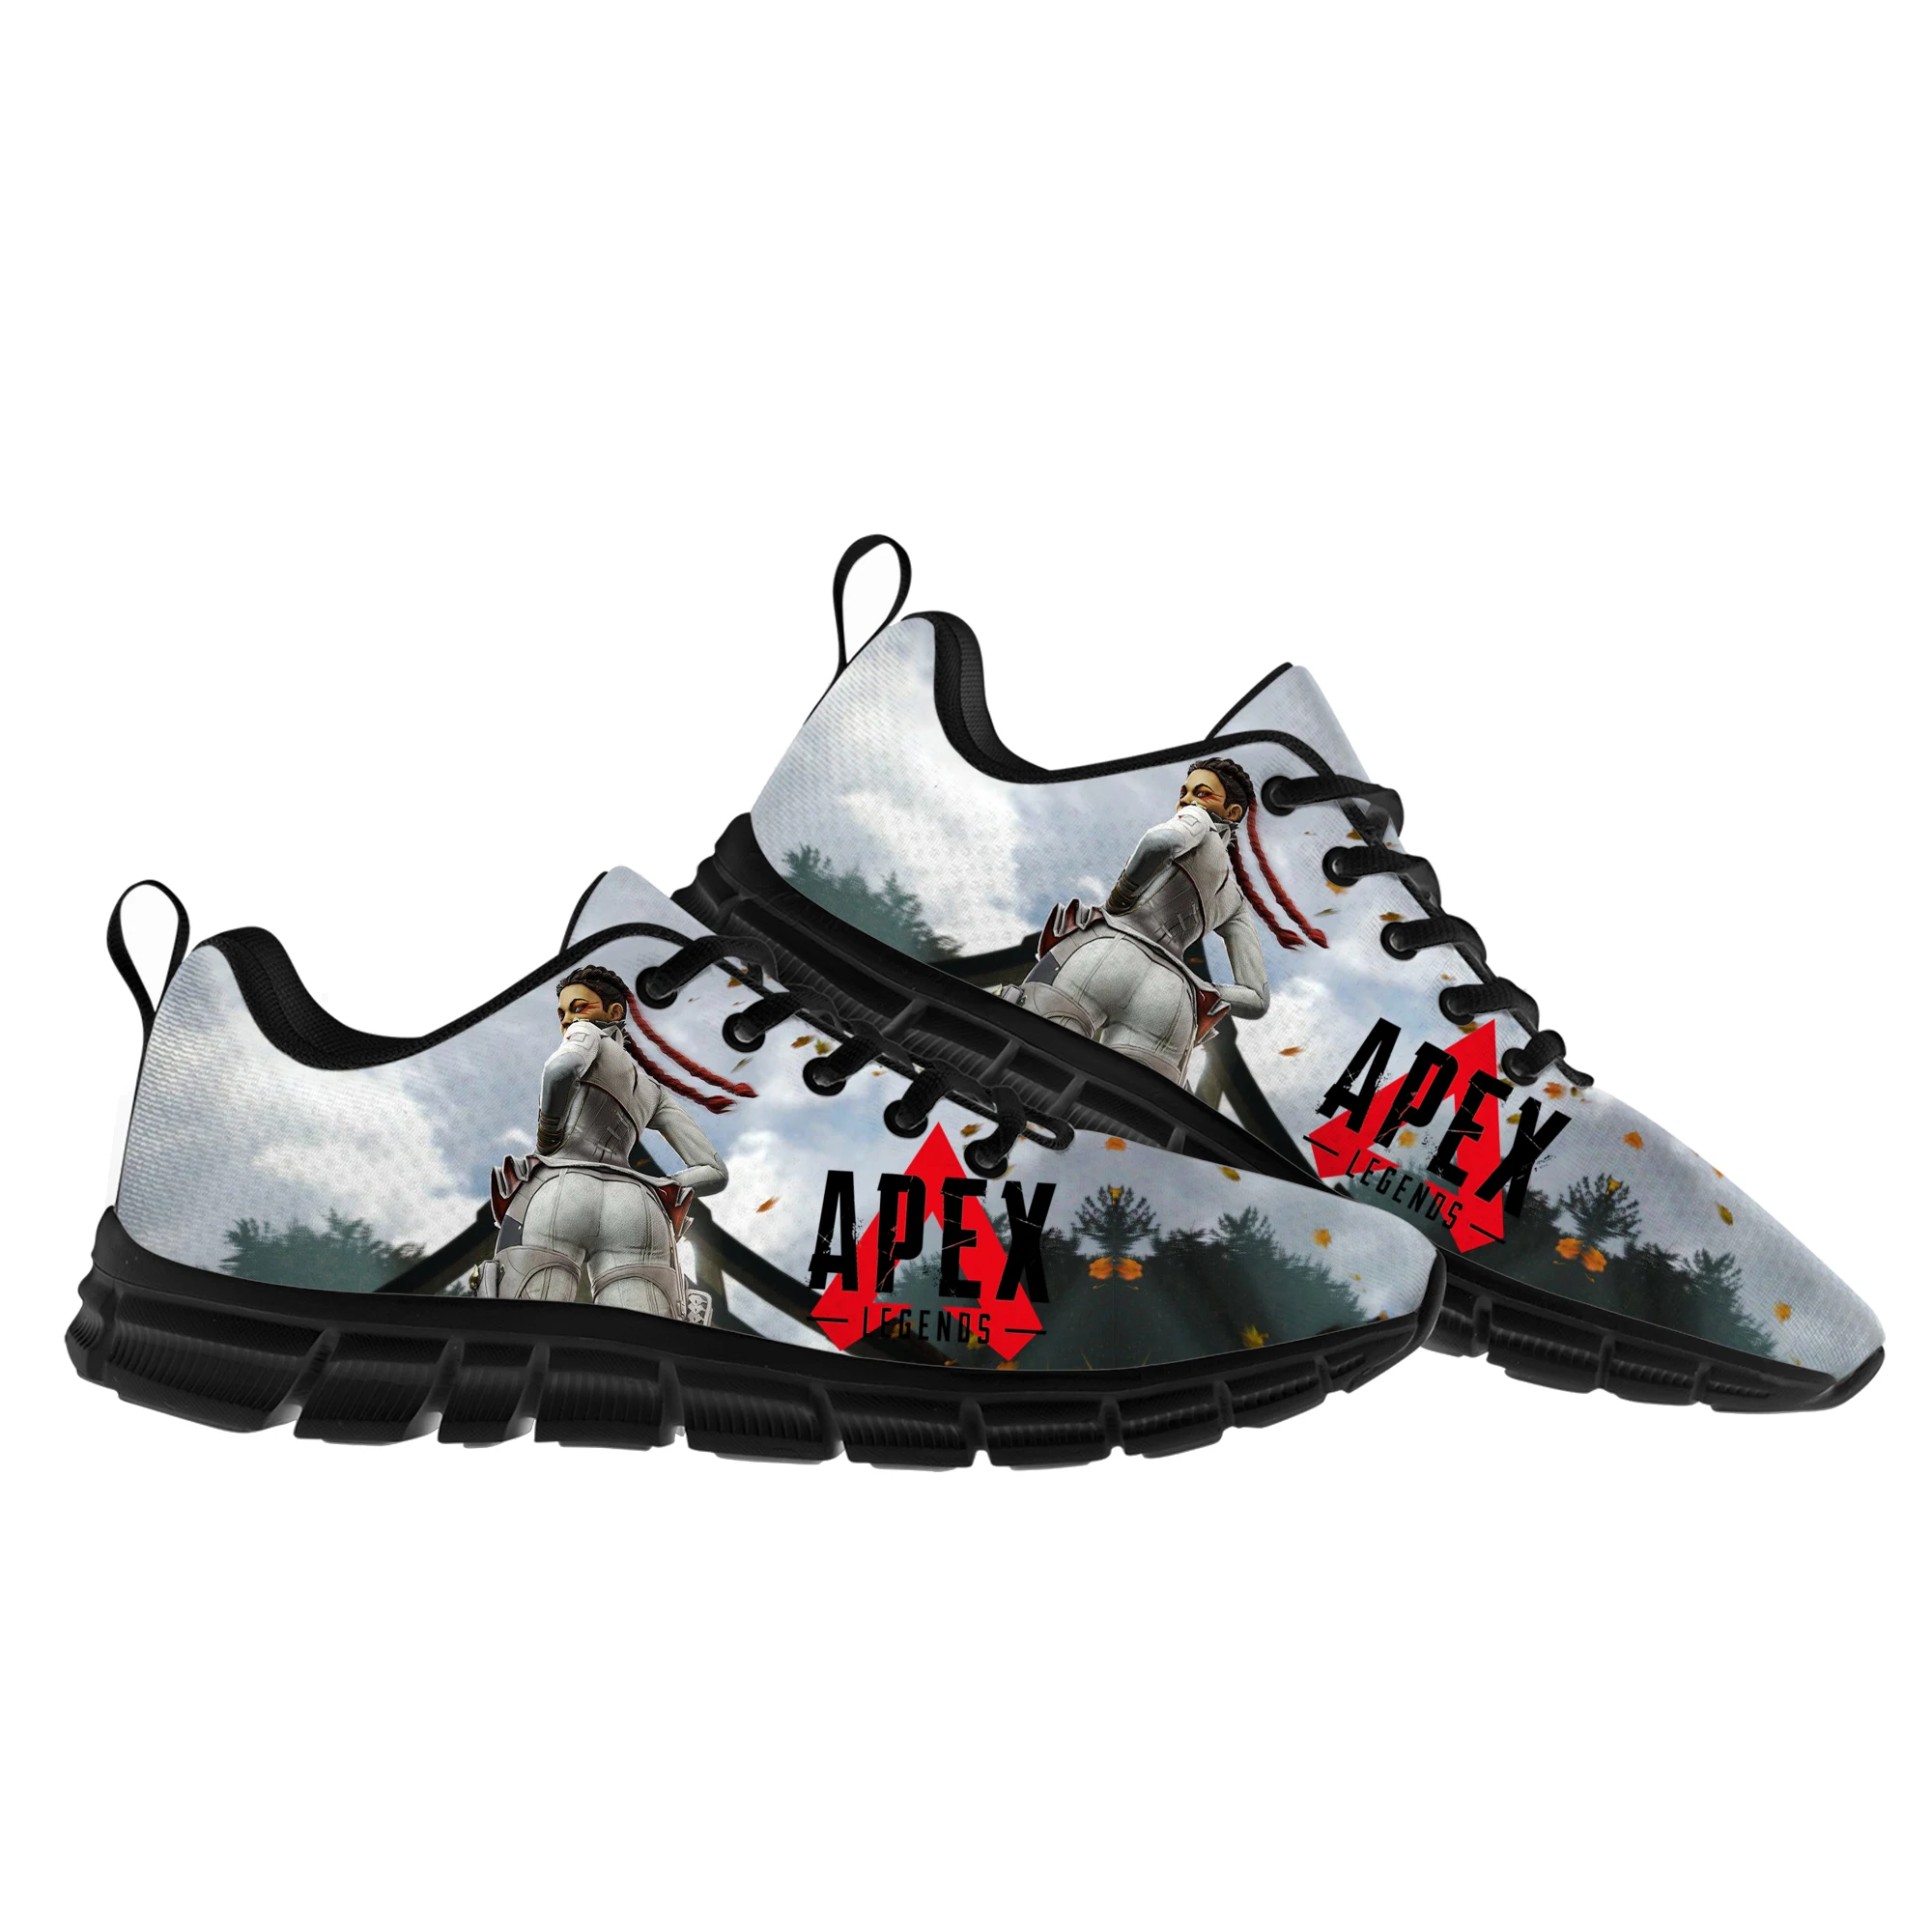 

Apex Legends Loba Sports Shoes Hot Cartoon Game Mens Womens Teenager Children Sneakers High Quality Sneaker Custom Built Shoes